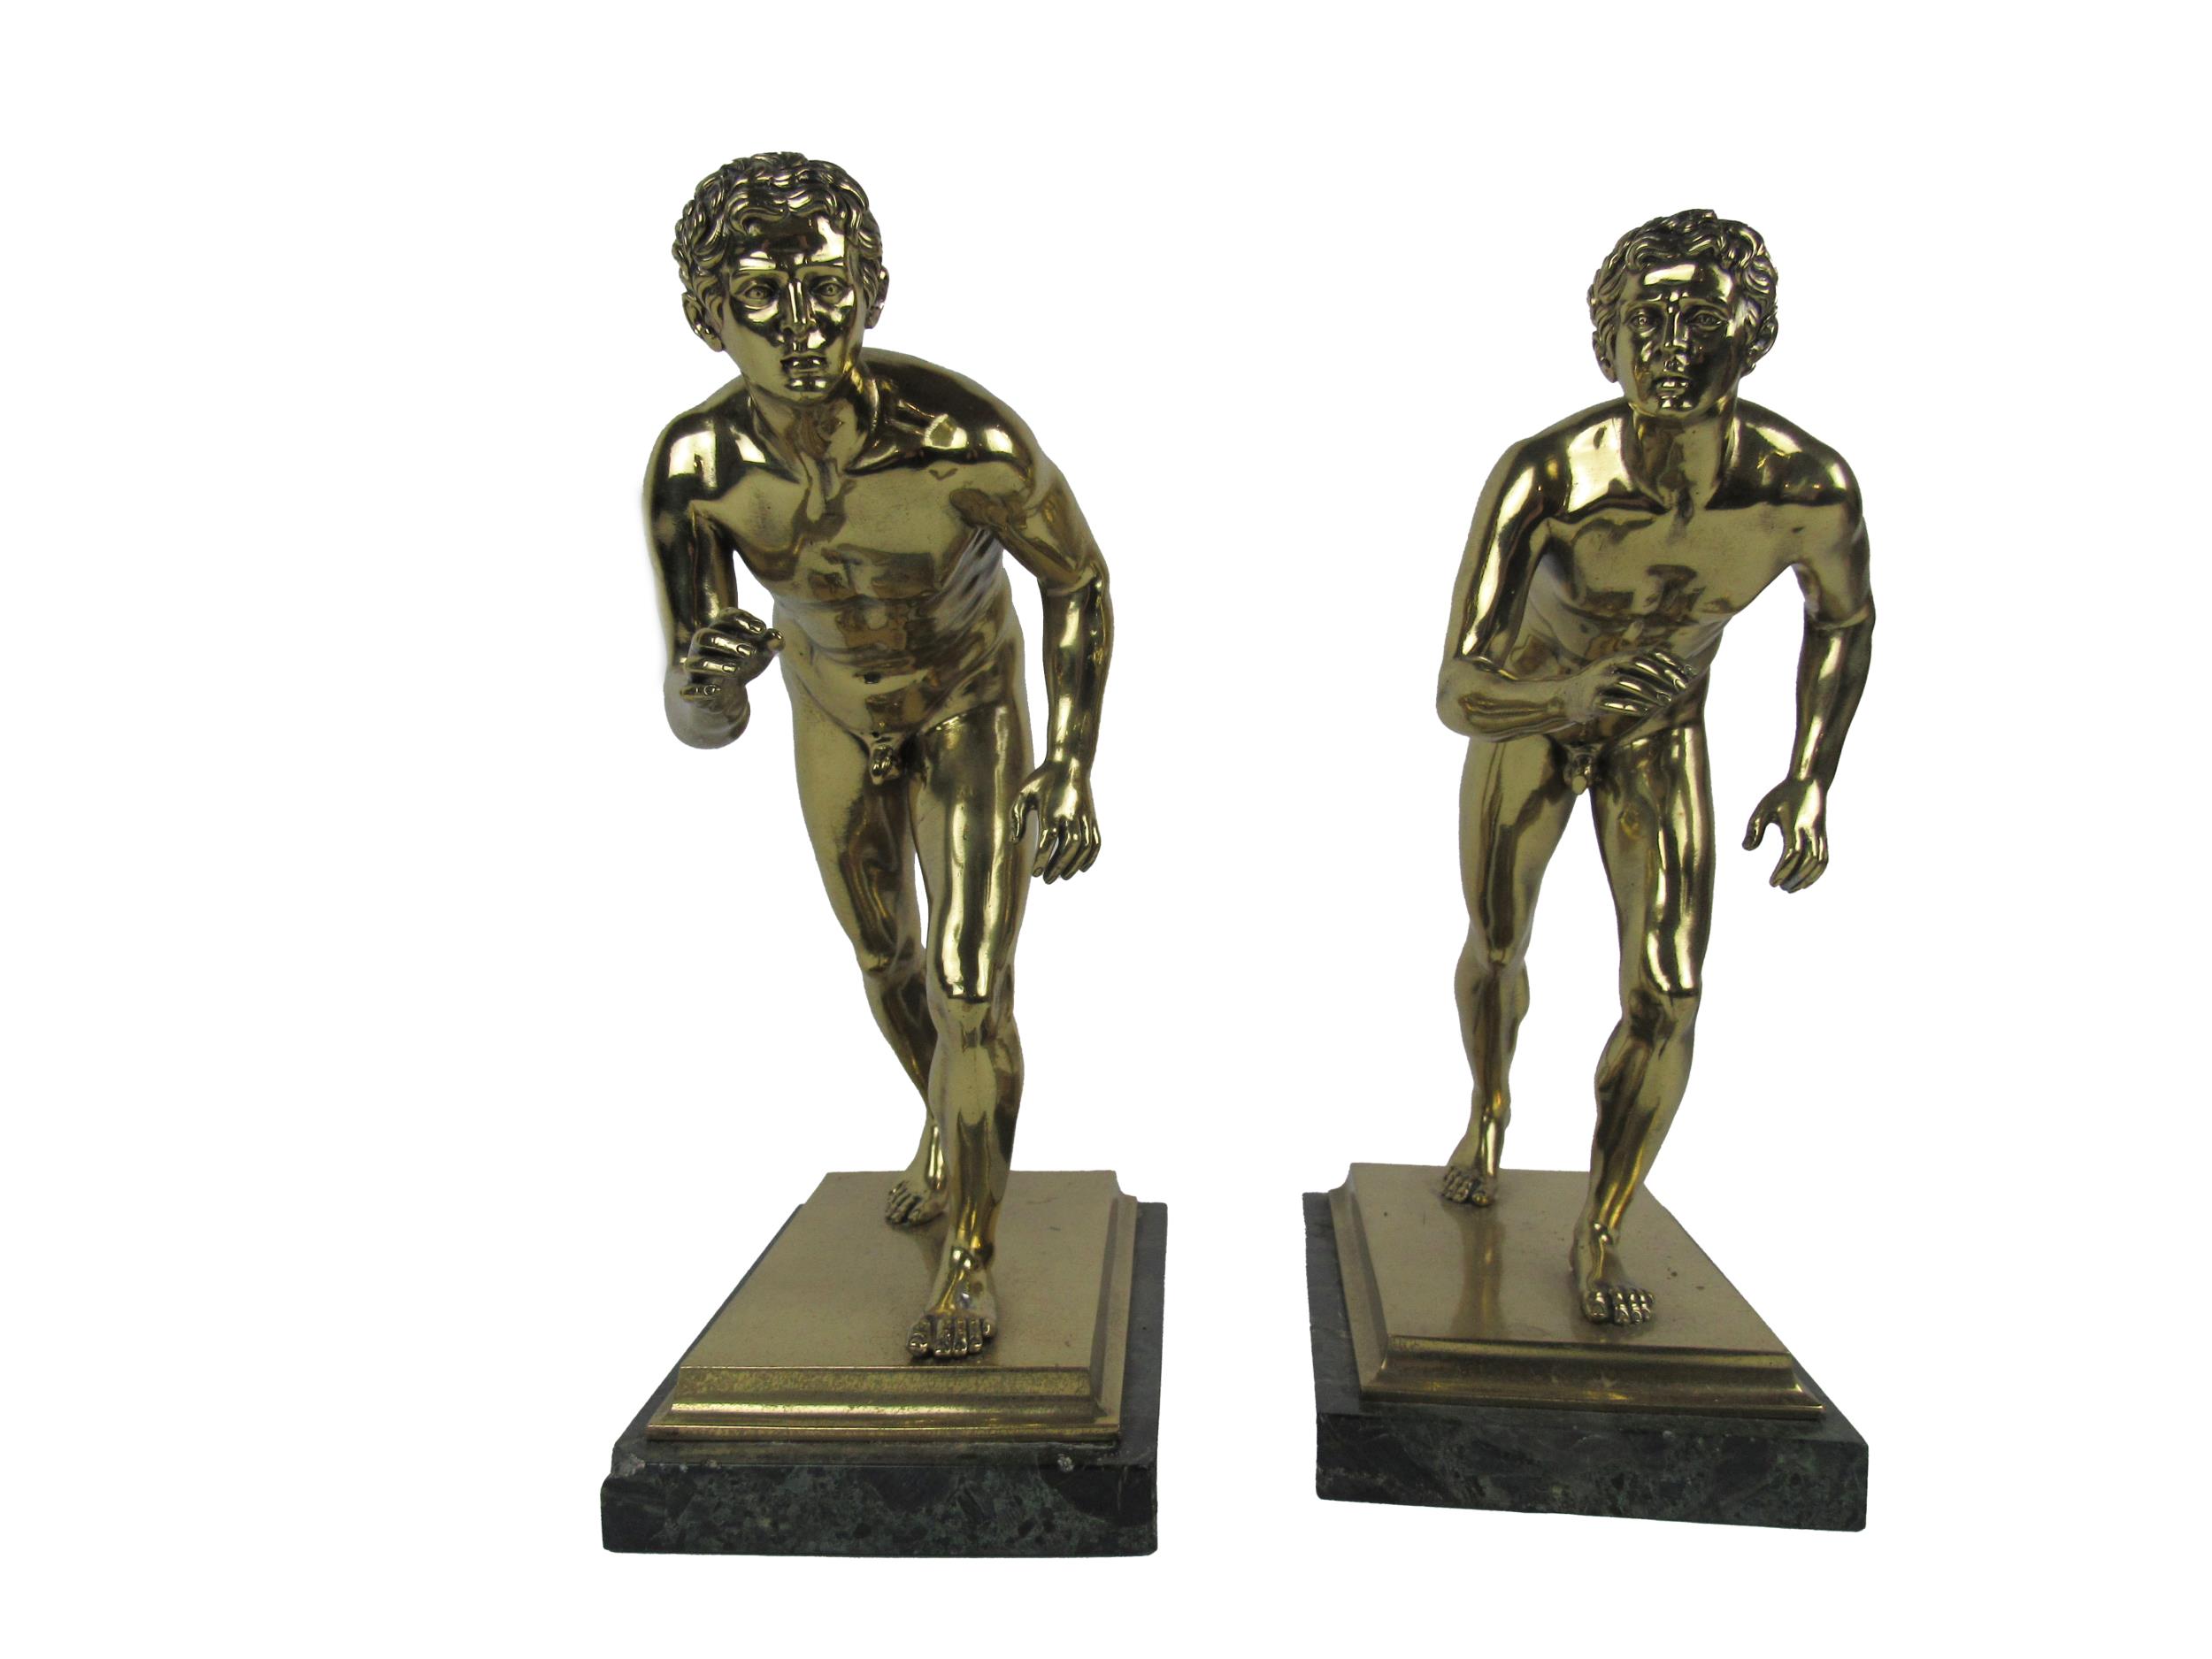 20th Century Italian School, after the Antique A pair of gilded bronze Figures of Roman Wrestlers or